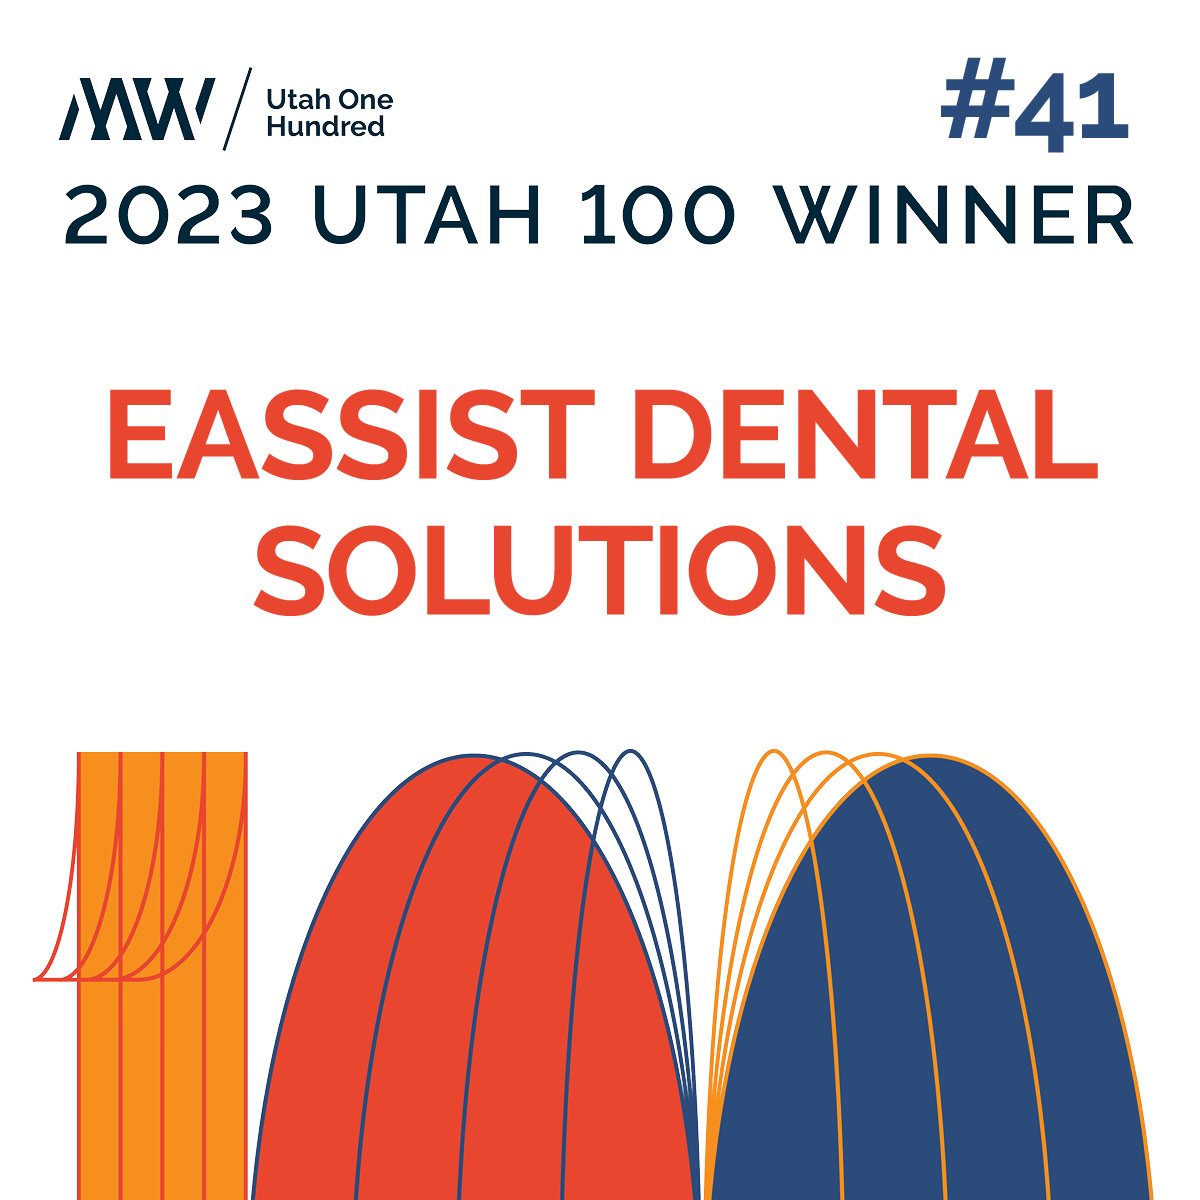 eAssist Dental Solutions Named One of Utah’s 100 Fastest Growing Companies for the 7th Year in a Row by MountainWest Capital Network